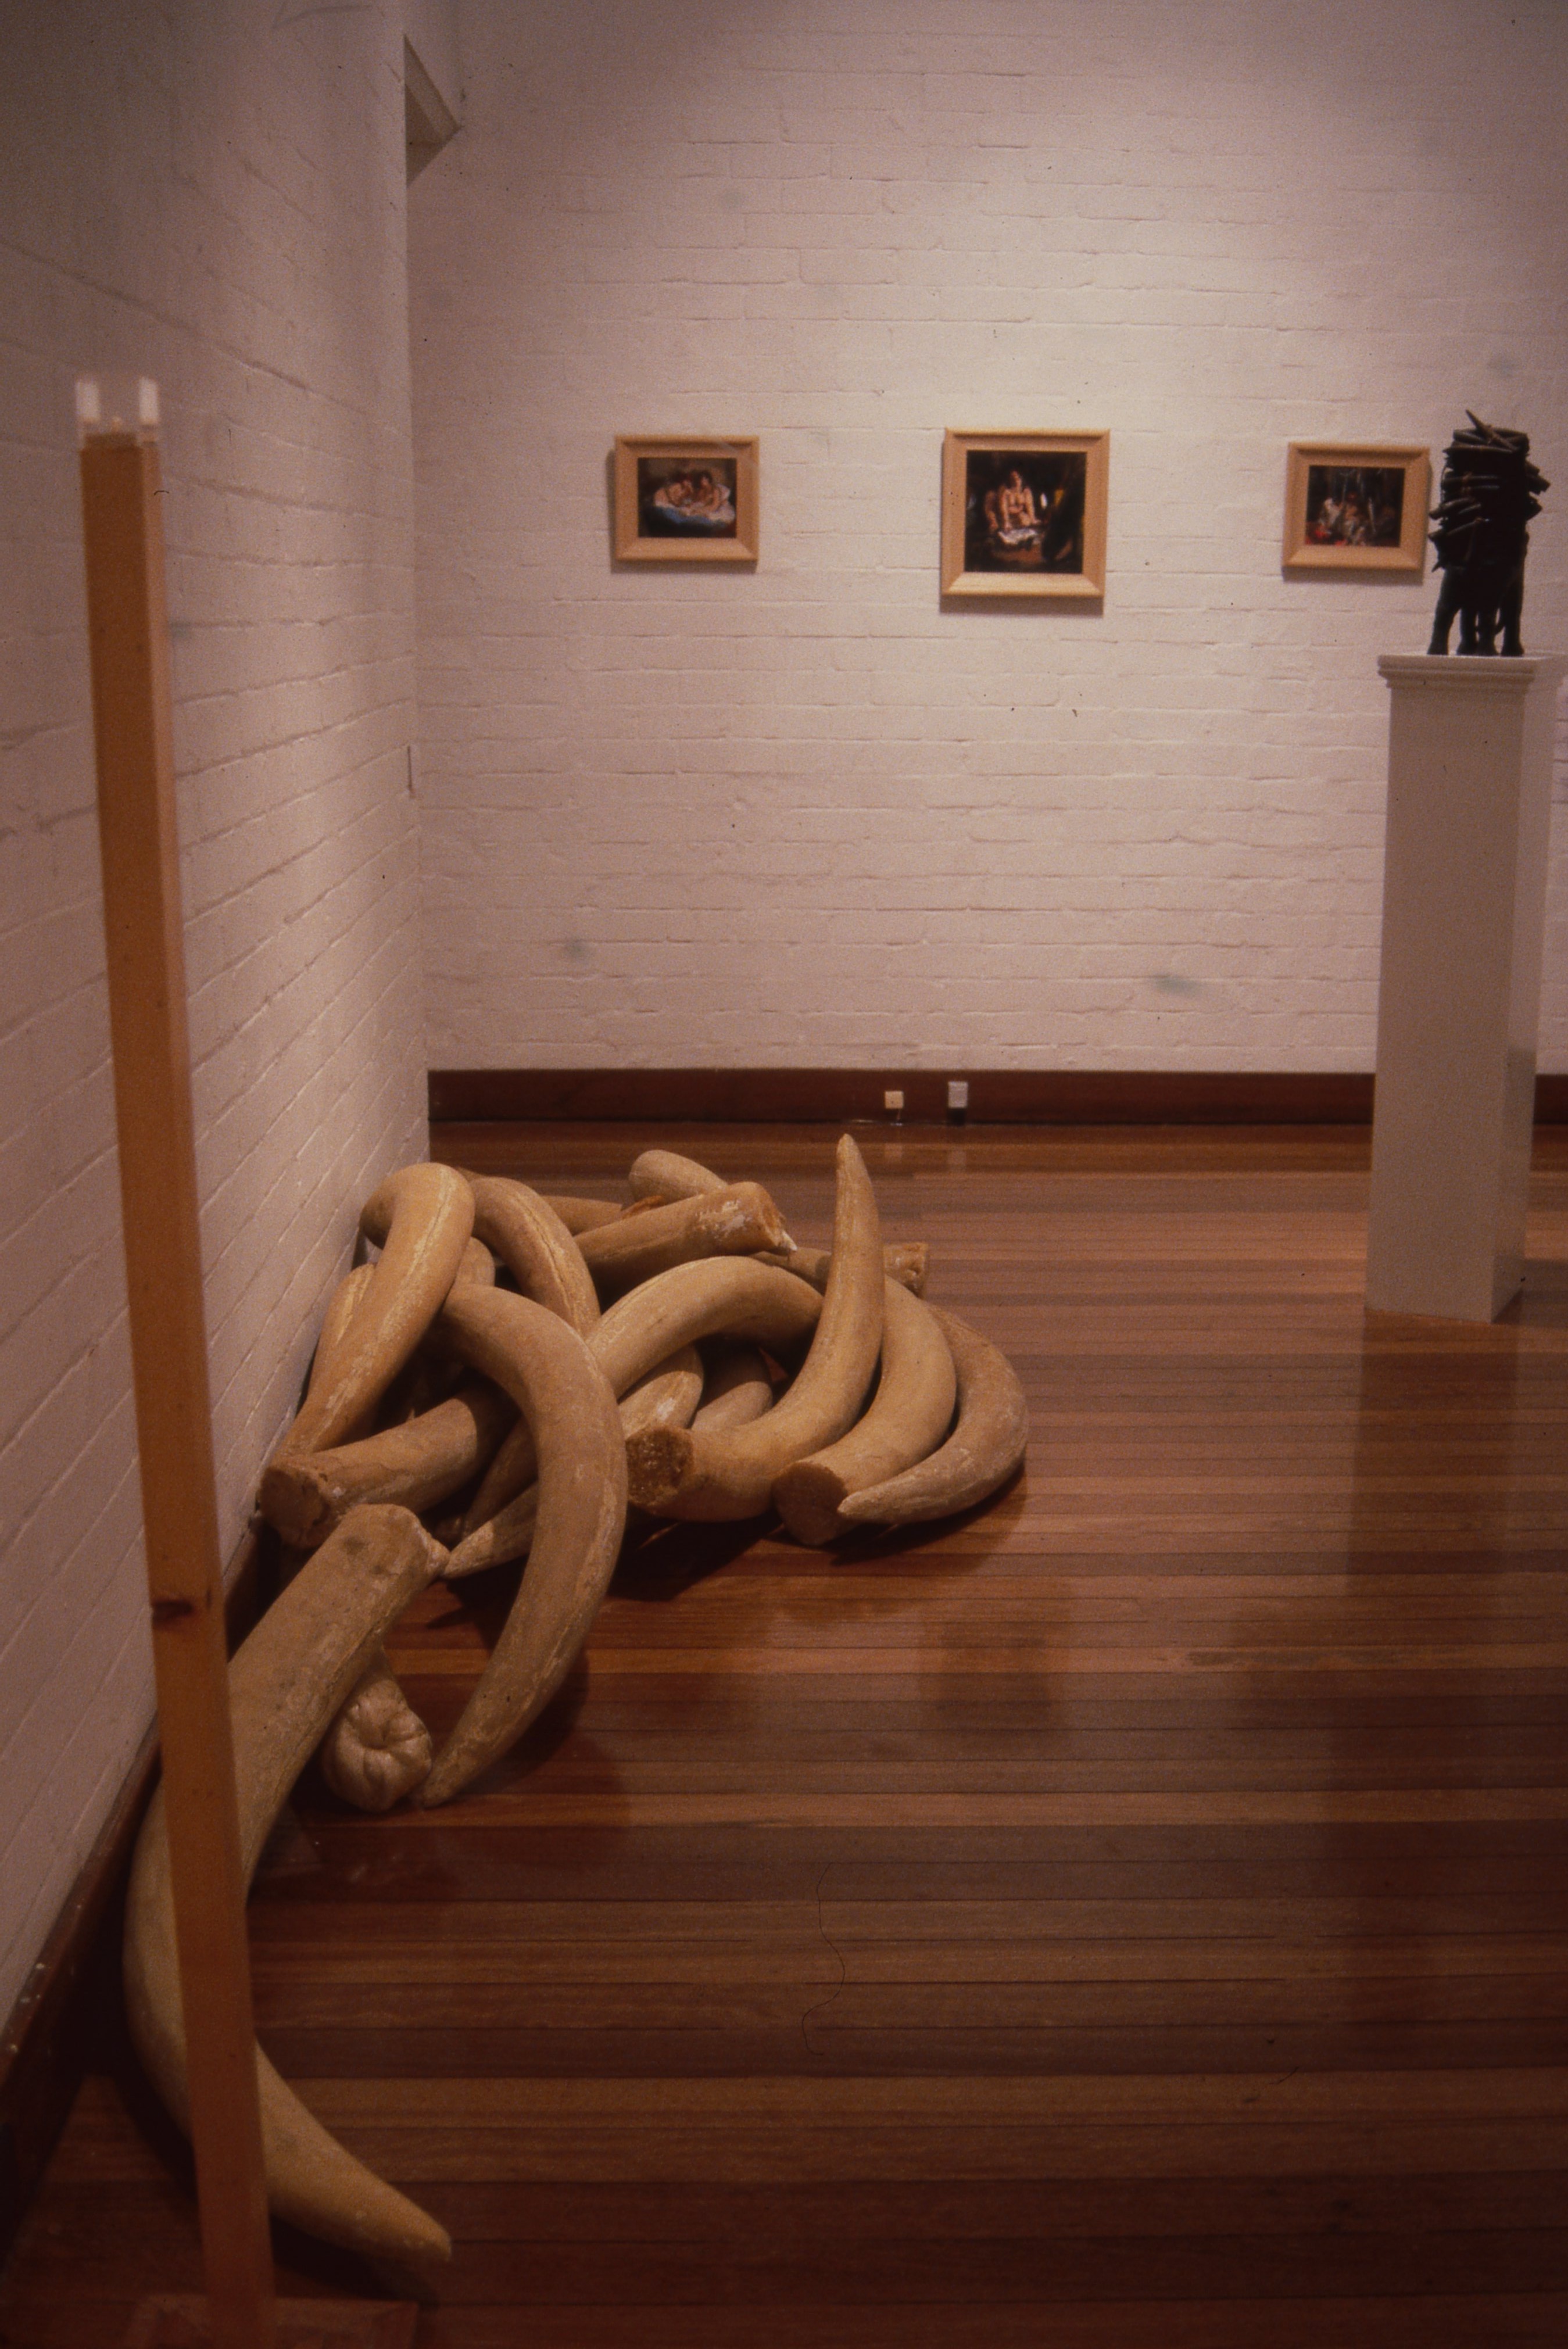 idg_archive_1998_after_the_masters_mfa_1993-1997_selected_work_001_install.jpg